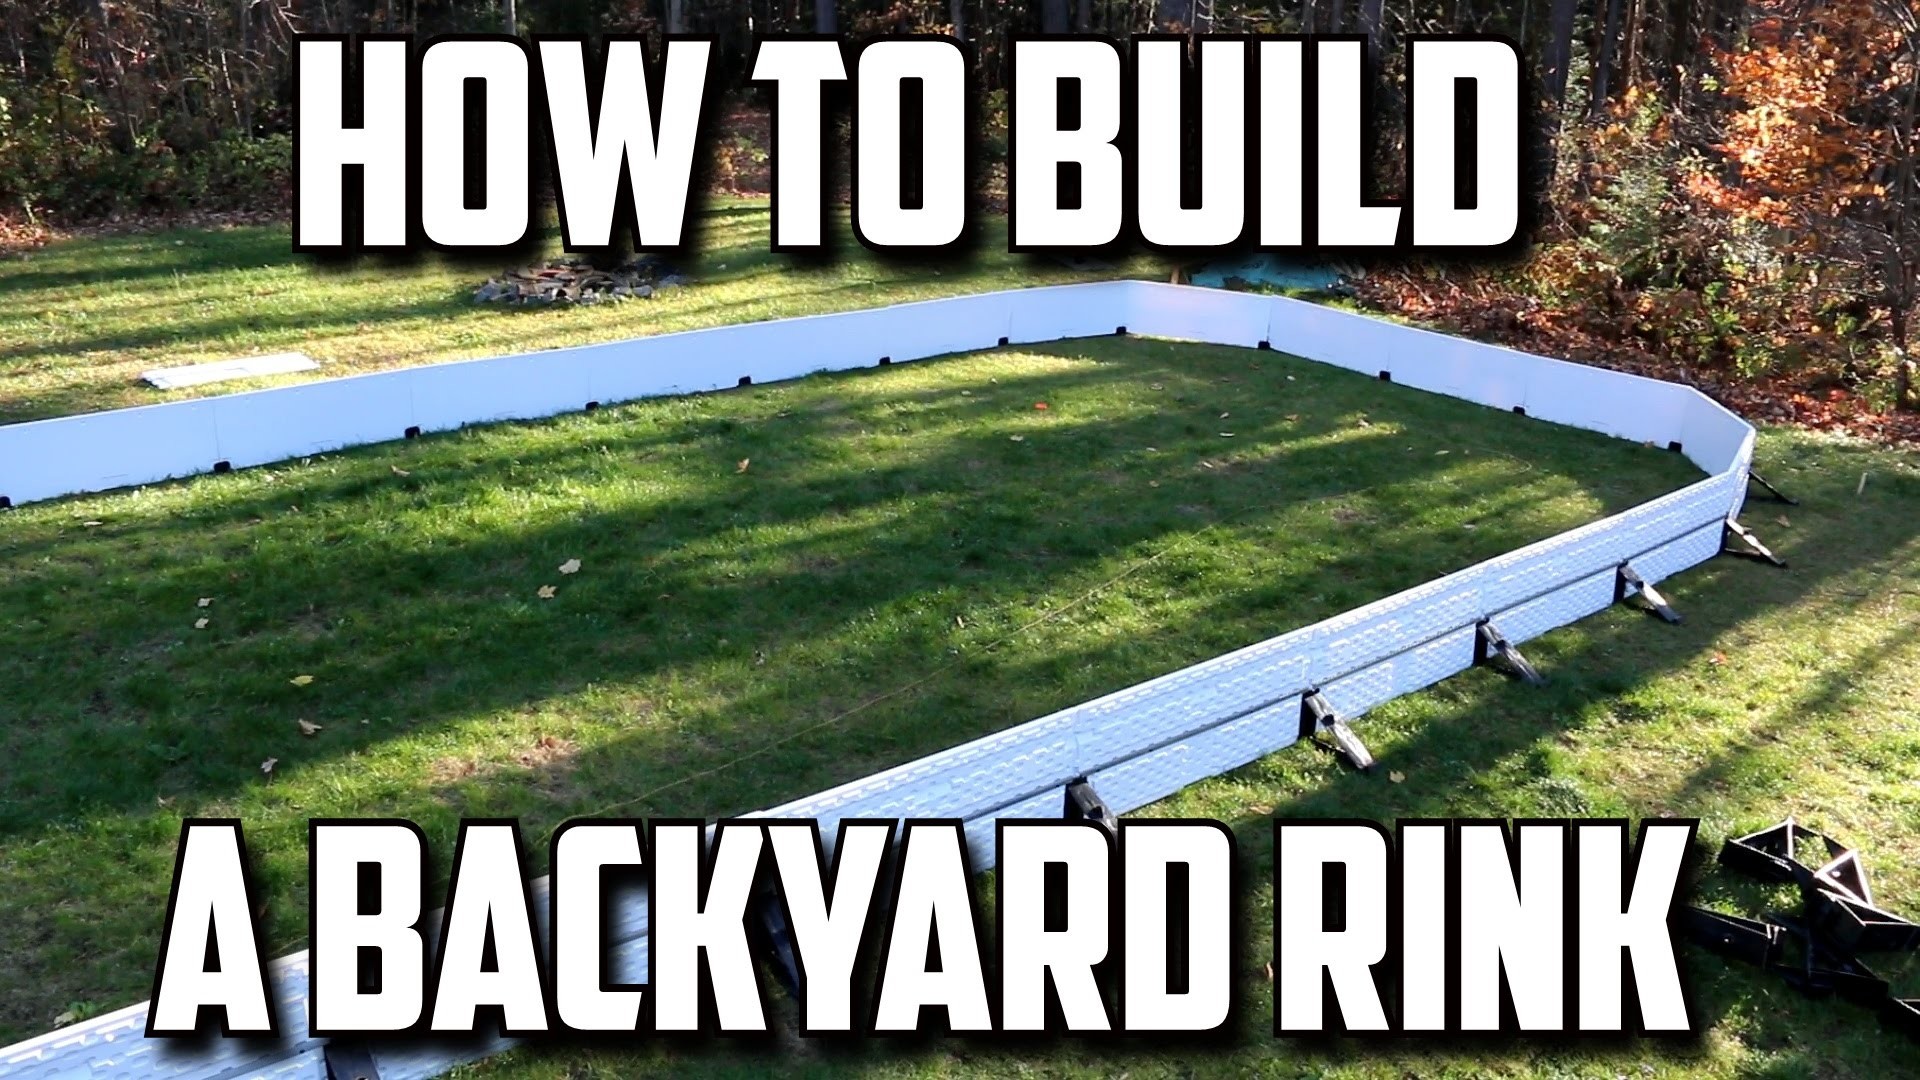 How to build a backyard rink